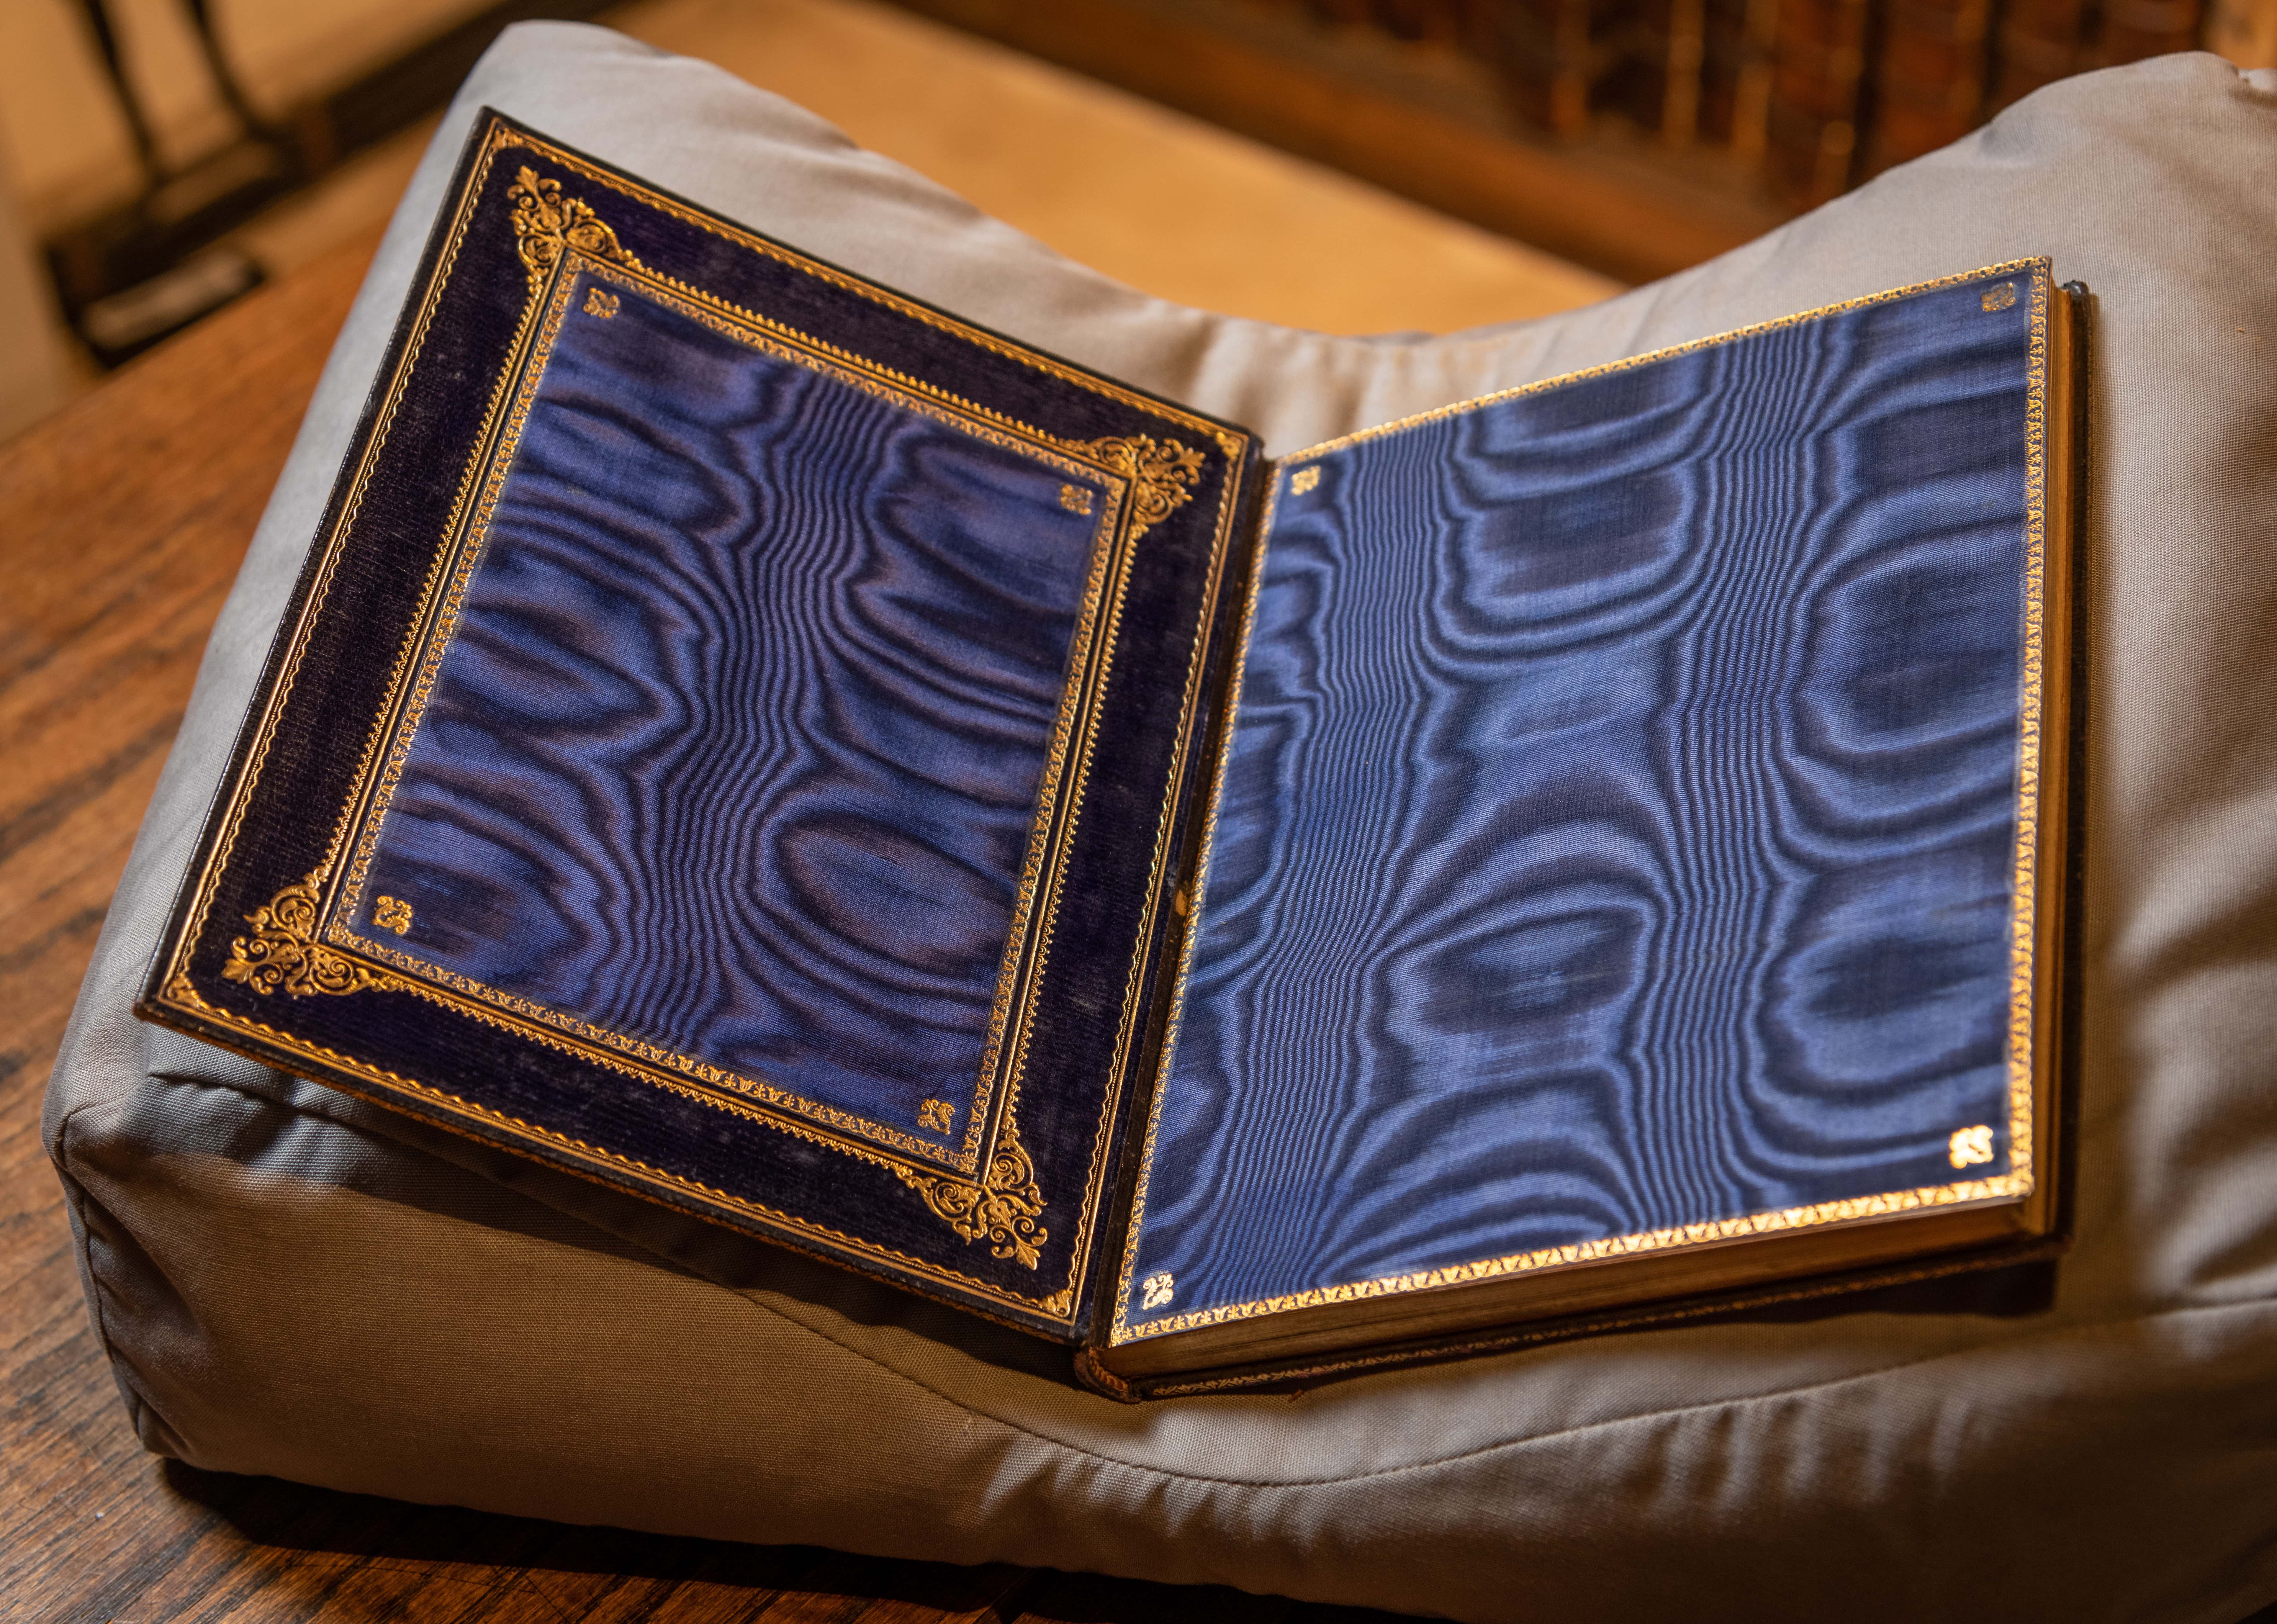 Book lying open with gilt edges and a blue silk lining.